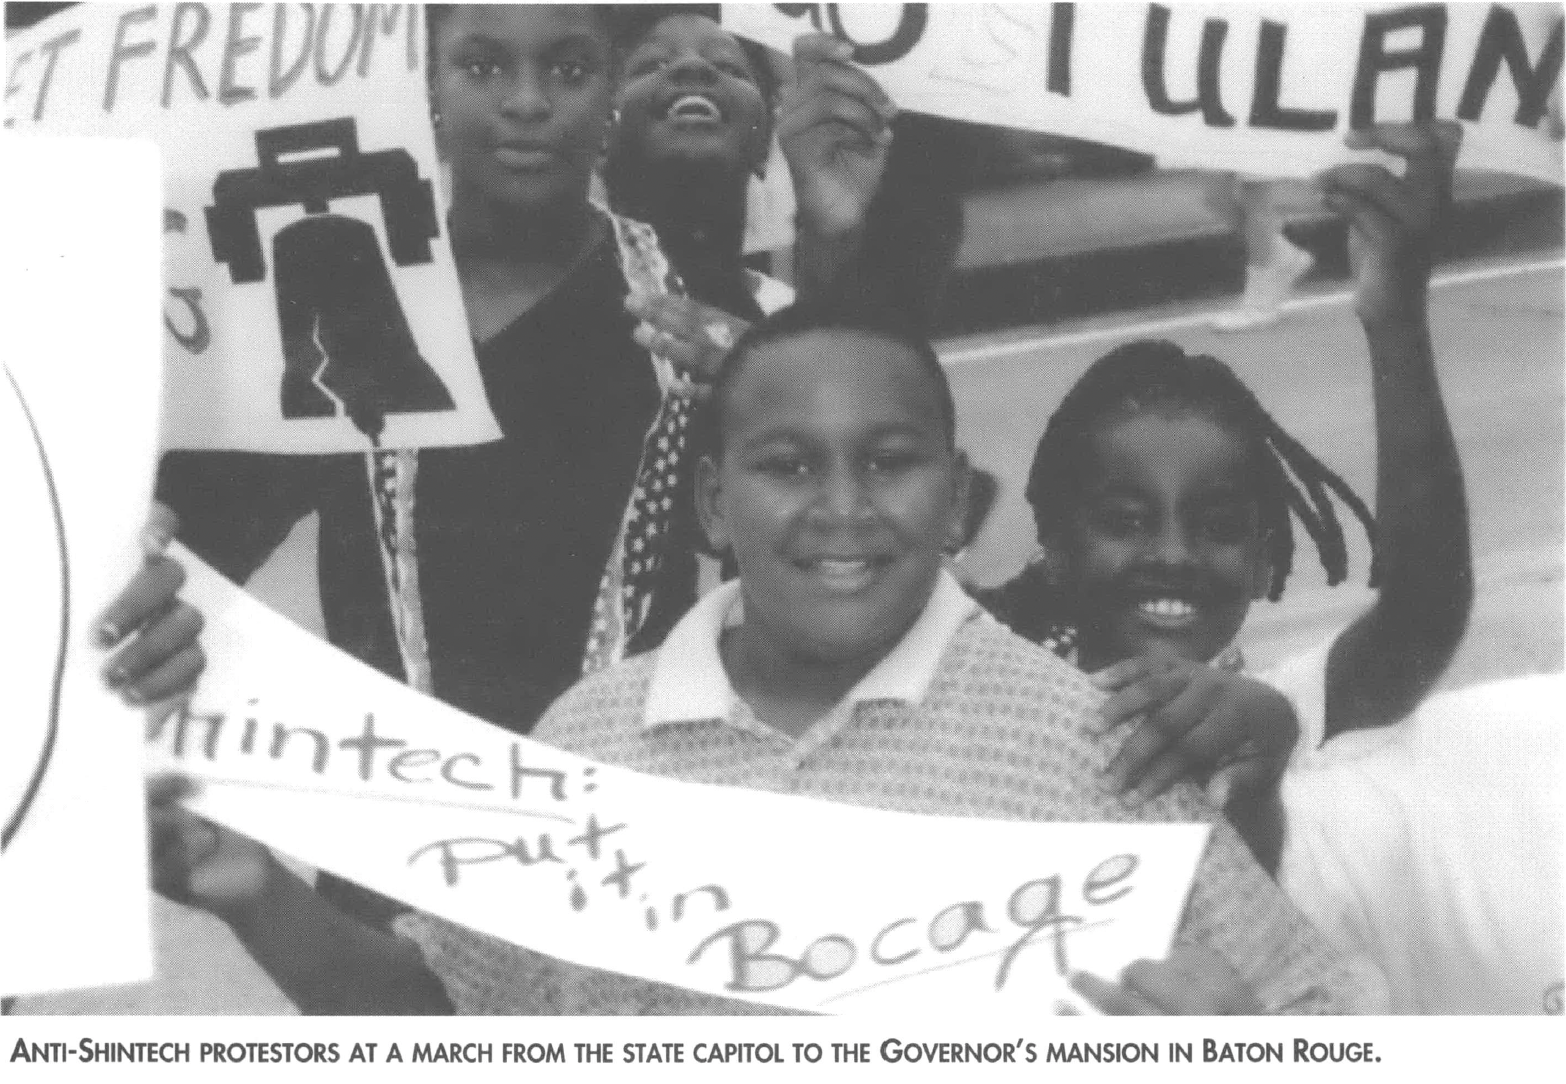 Children holding protest signs